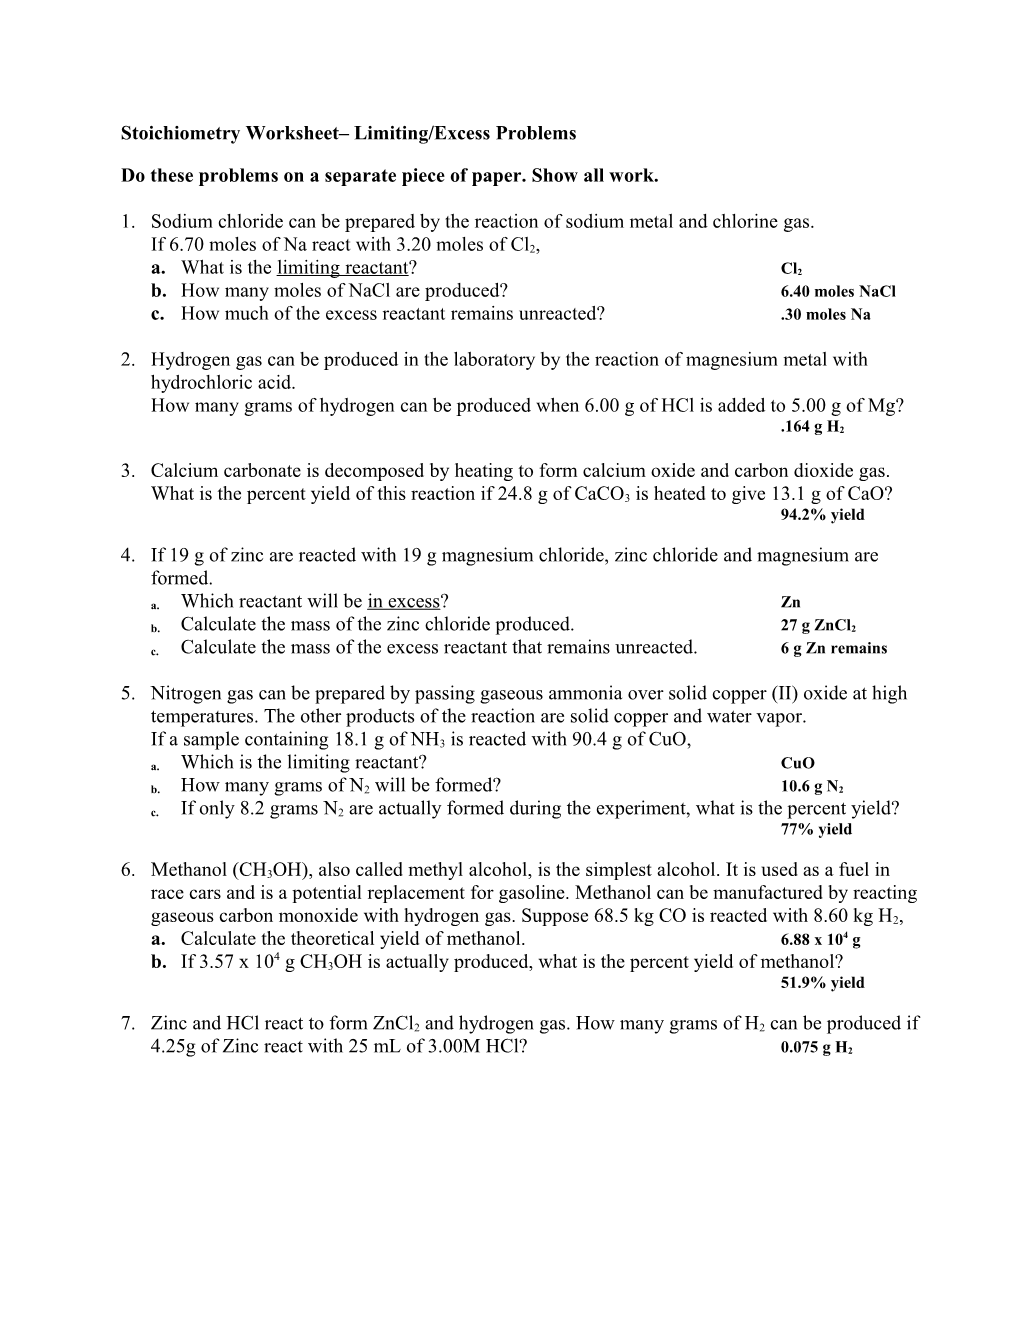 Stoichiometry Worksheet Limiting/Excess Problems